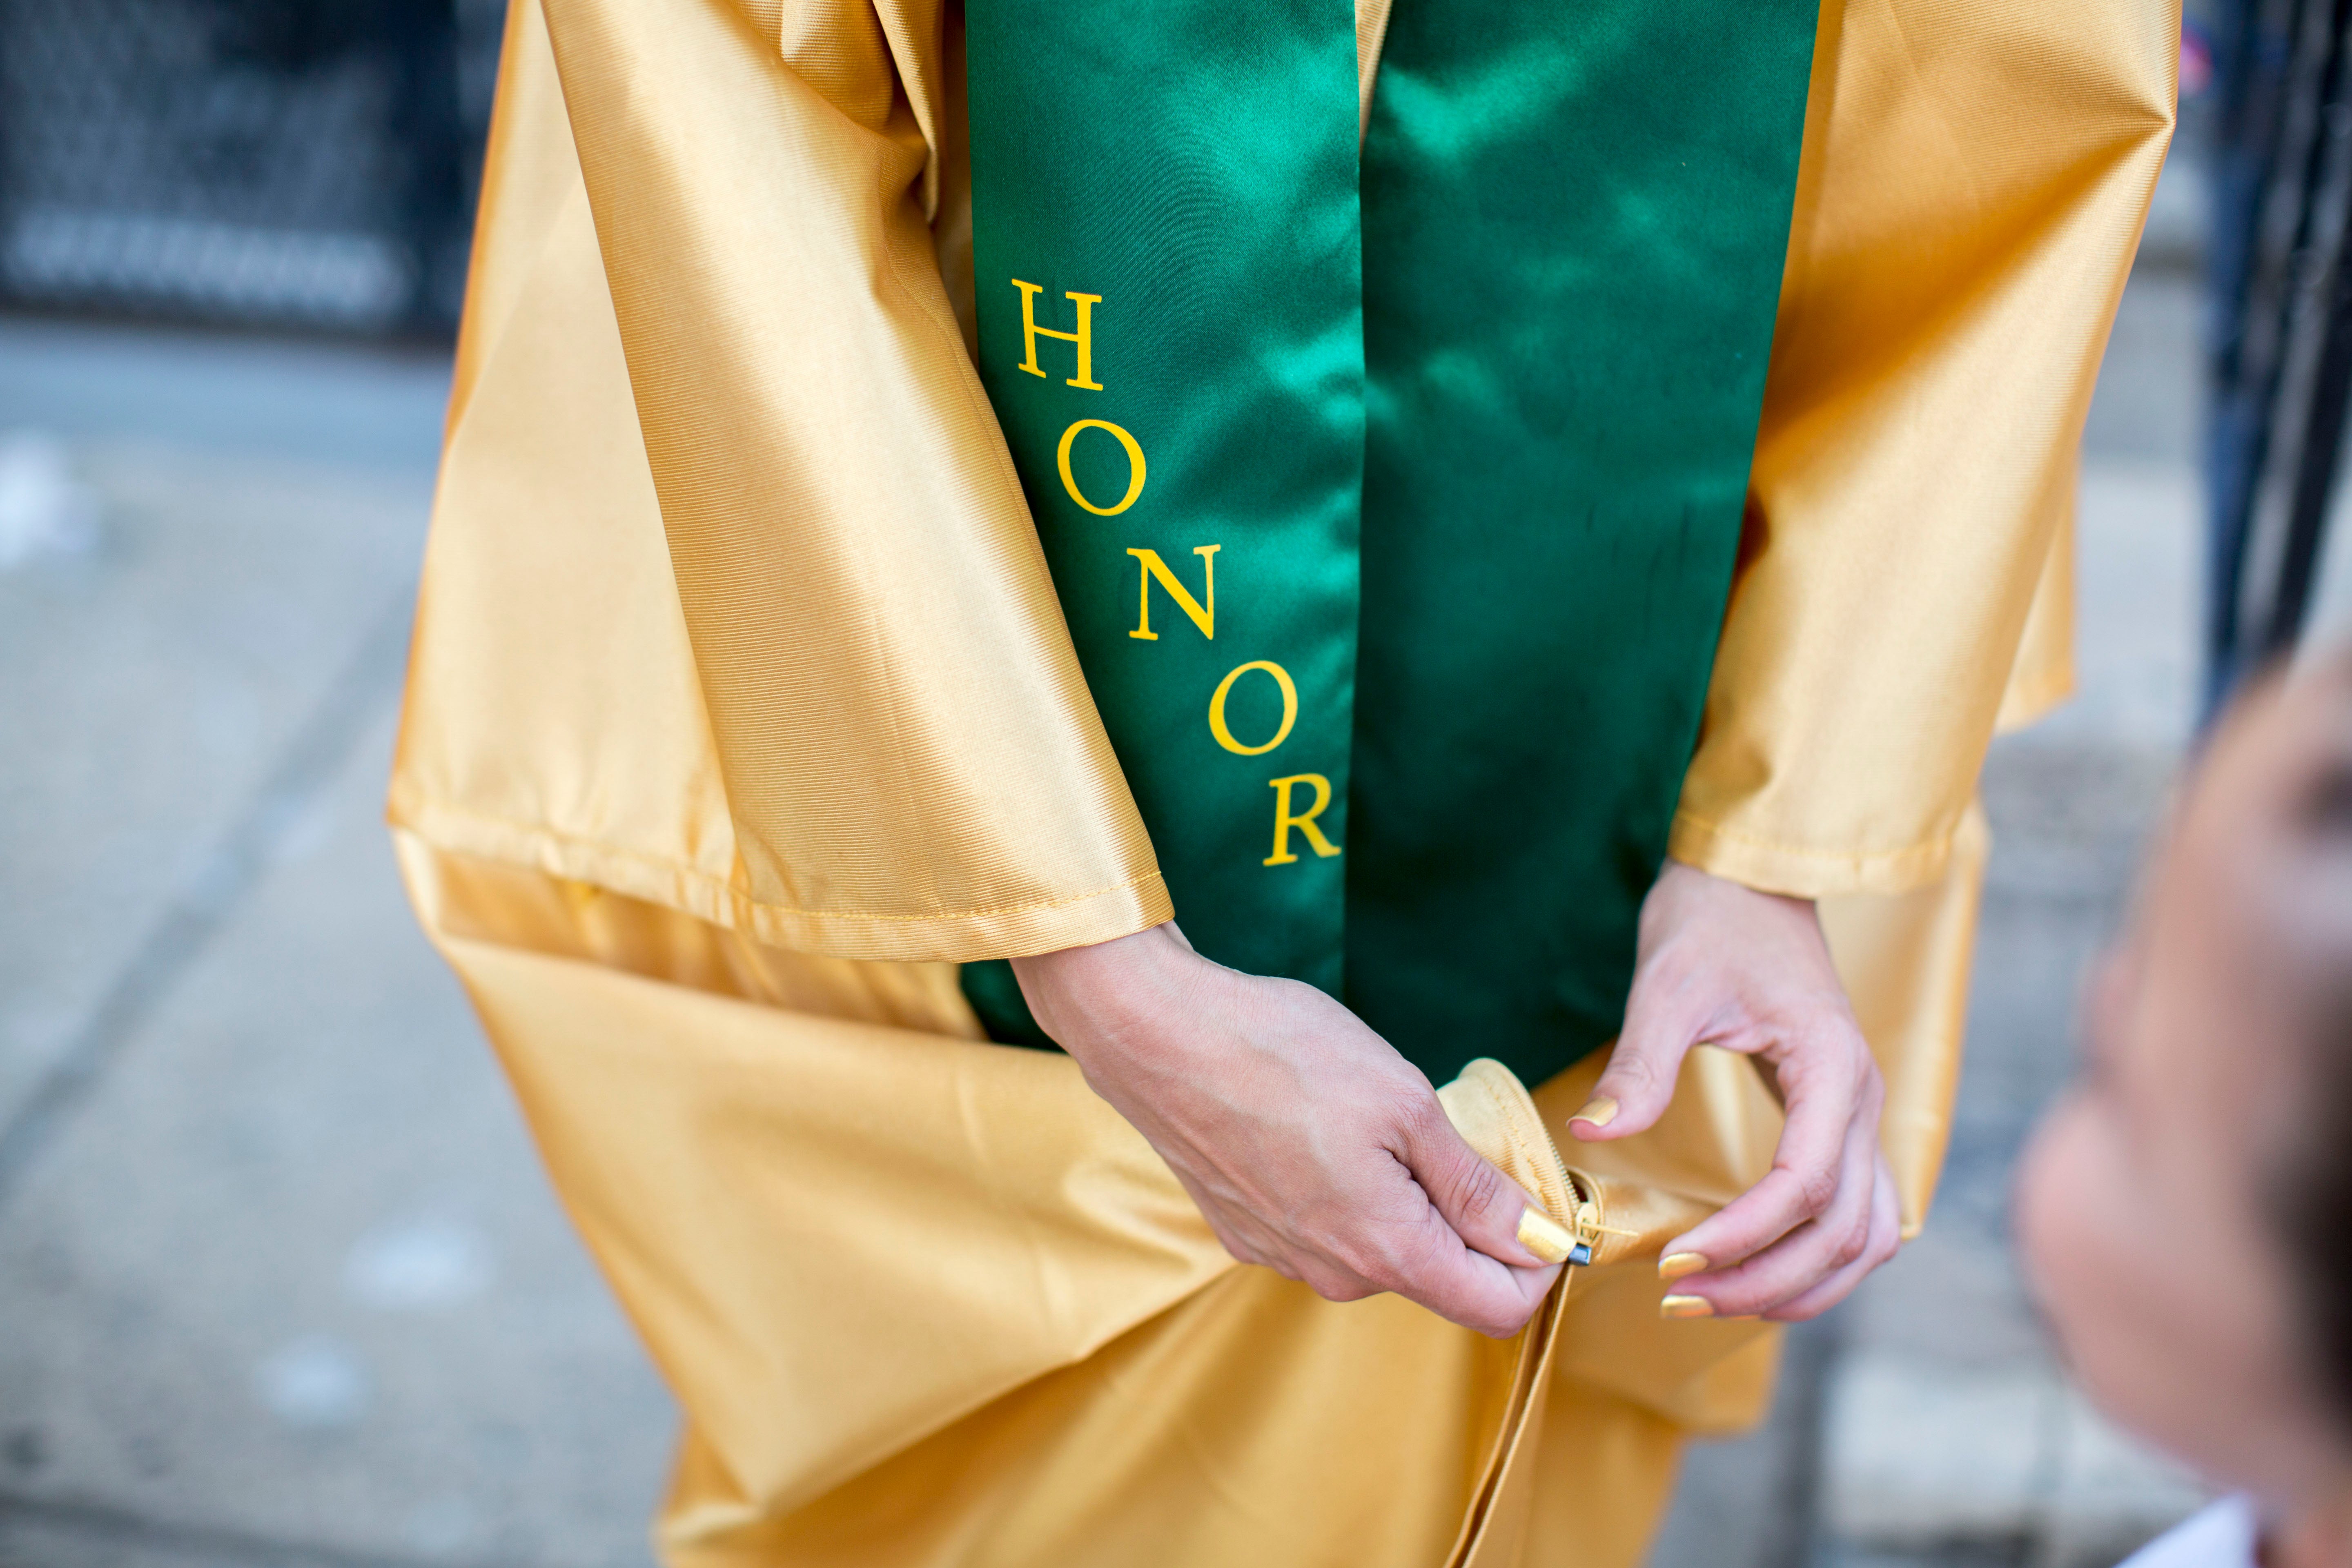 Savannah finished her senior year with a cumulative GPA that ranked her in the top 25 of her class, a designation that earned her a special gold gown and green sash. (Jessica Kourkounis/For Keystone Crossroads)